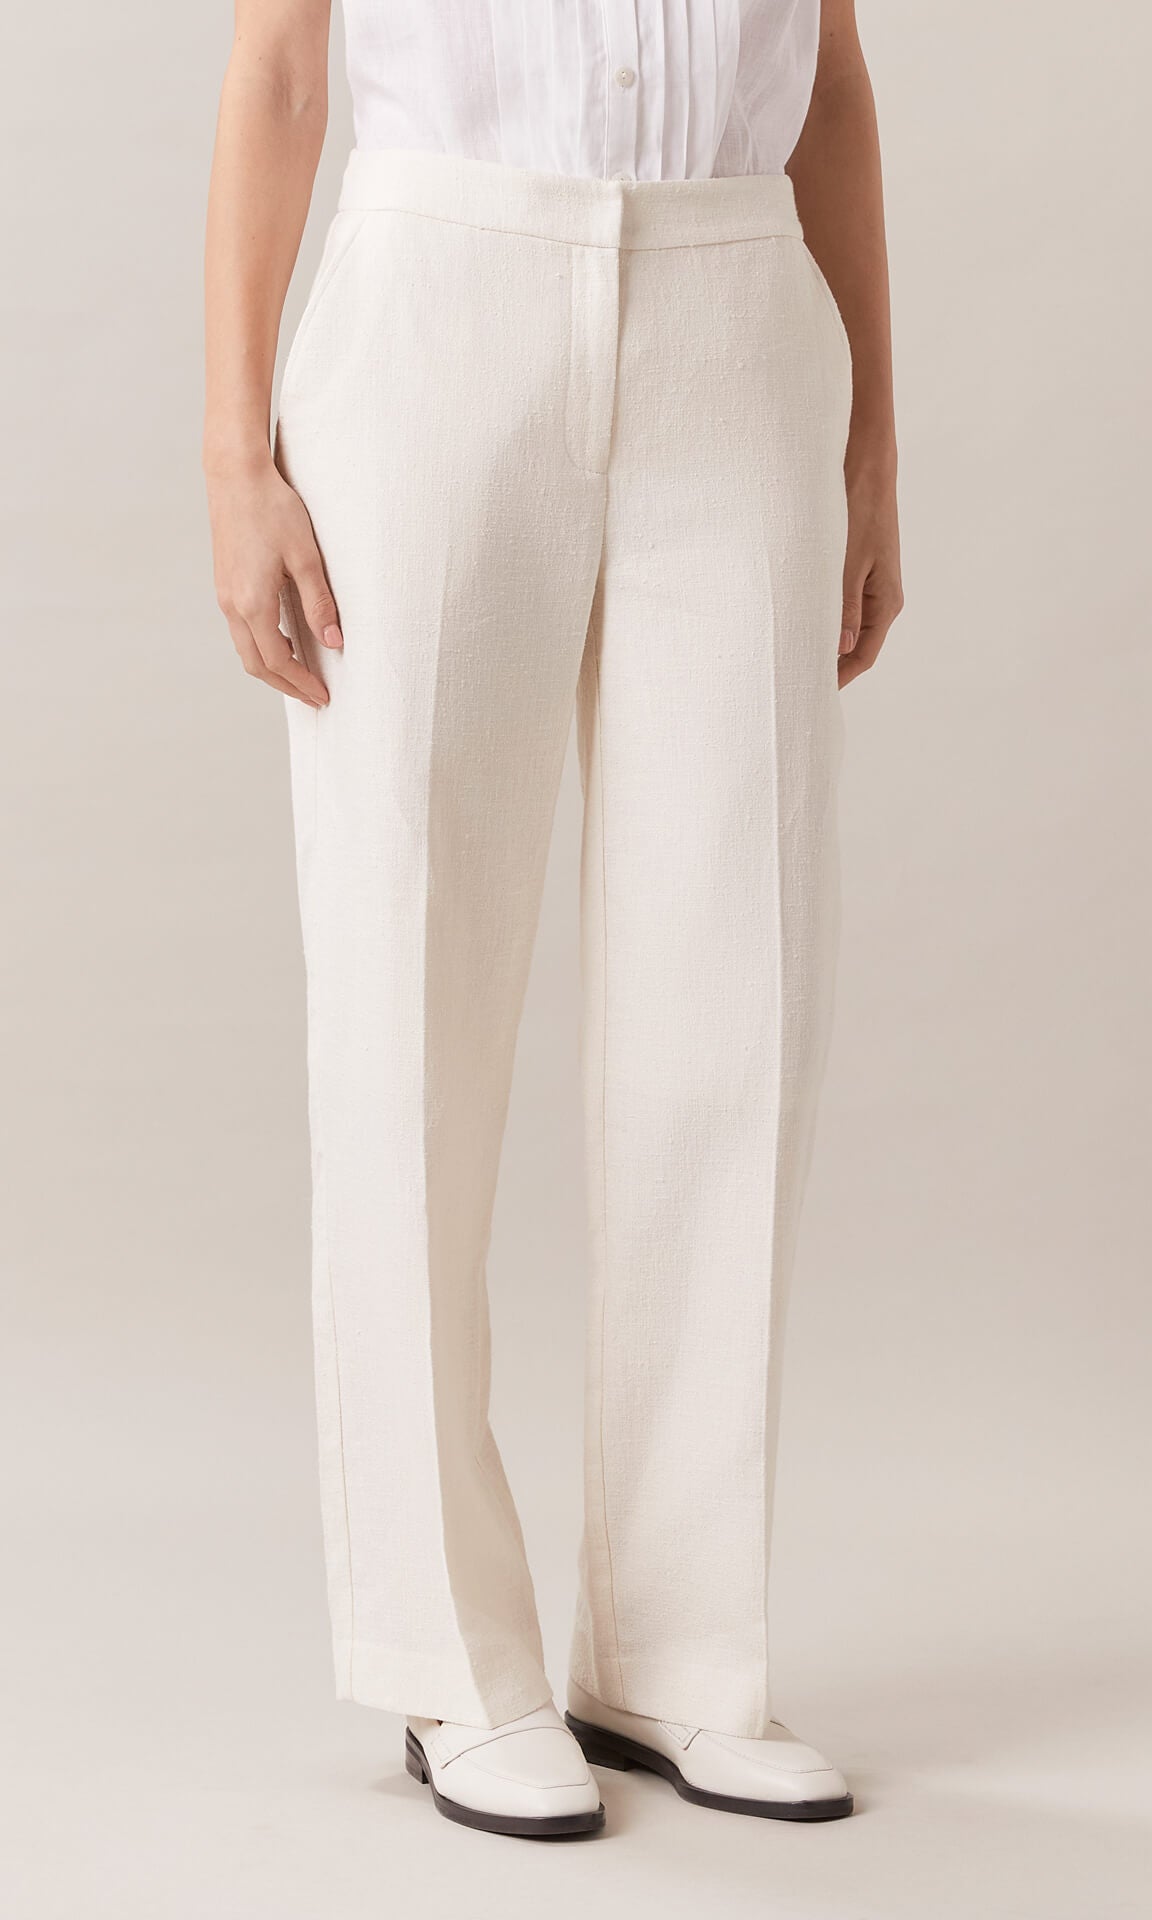 ZARA WOMEN NEW WIDE LEG PANTS WITH DARTS High-waisted OYSTER WHITE 3069/566  | eBay